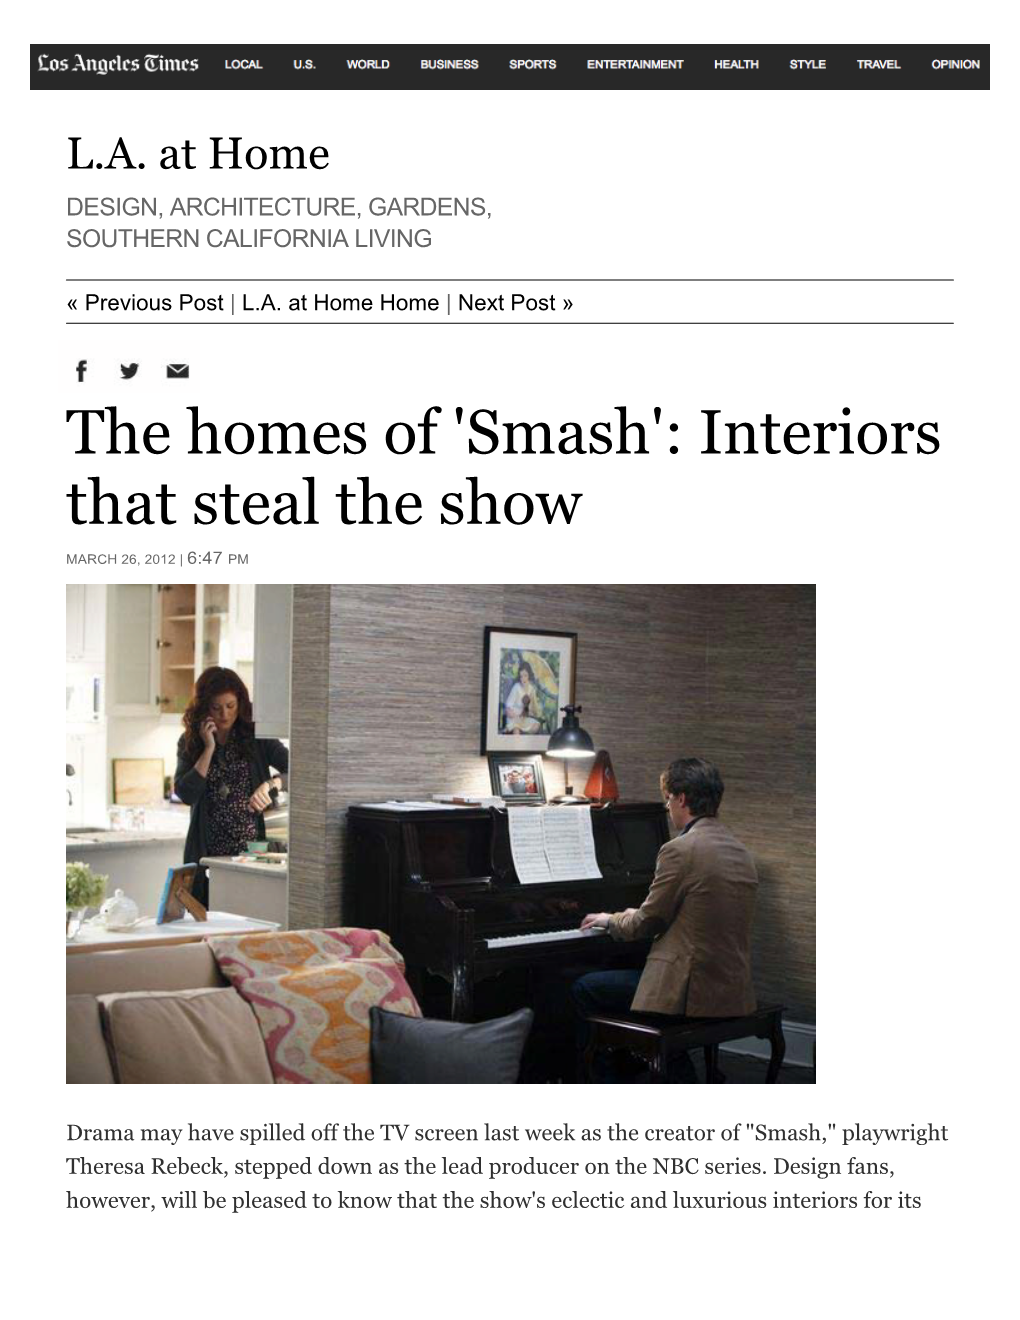 The Homes of 'Smash': Interiors That Steal the Show